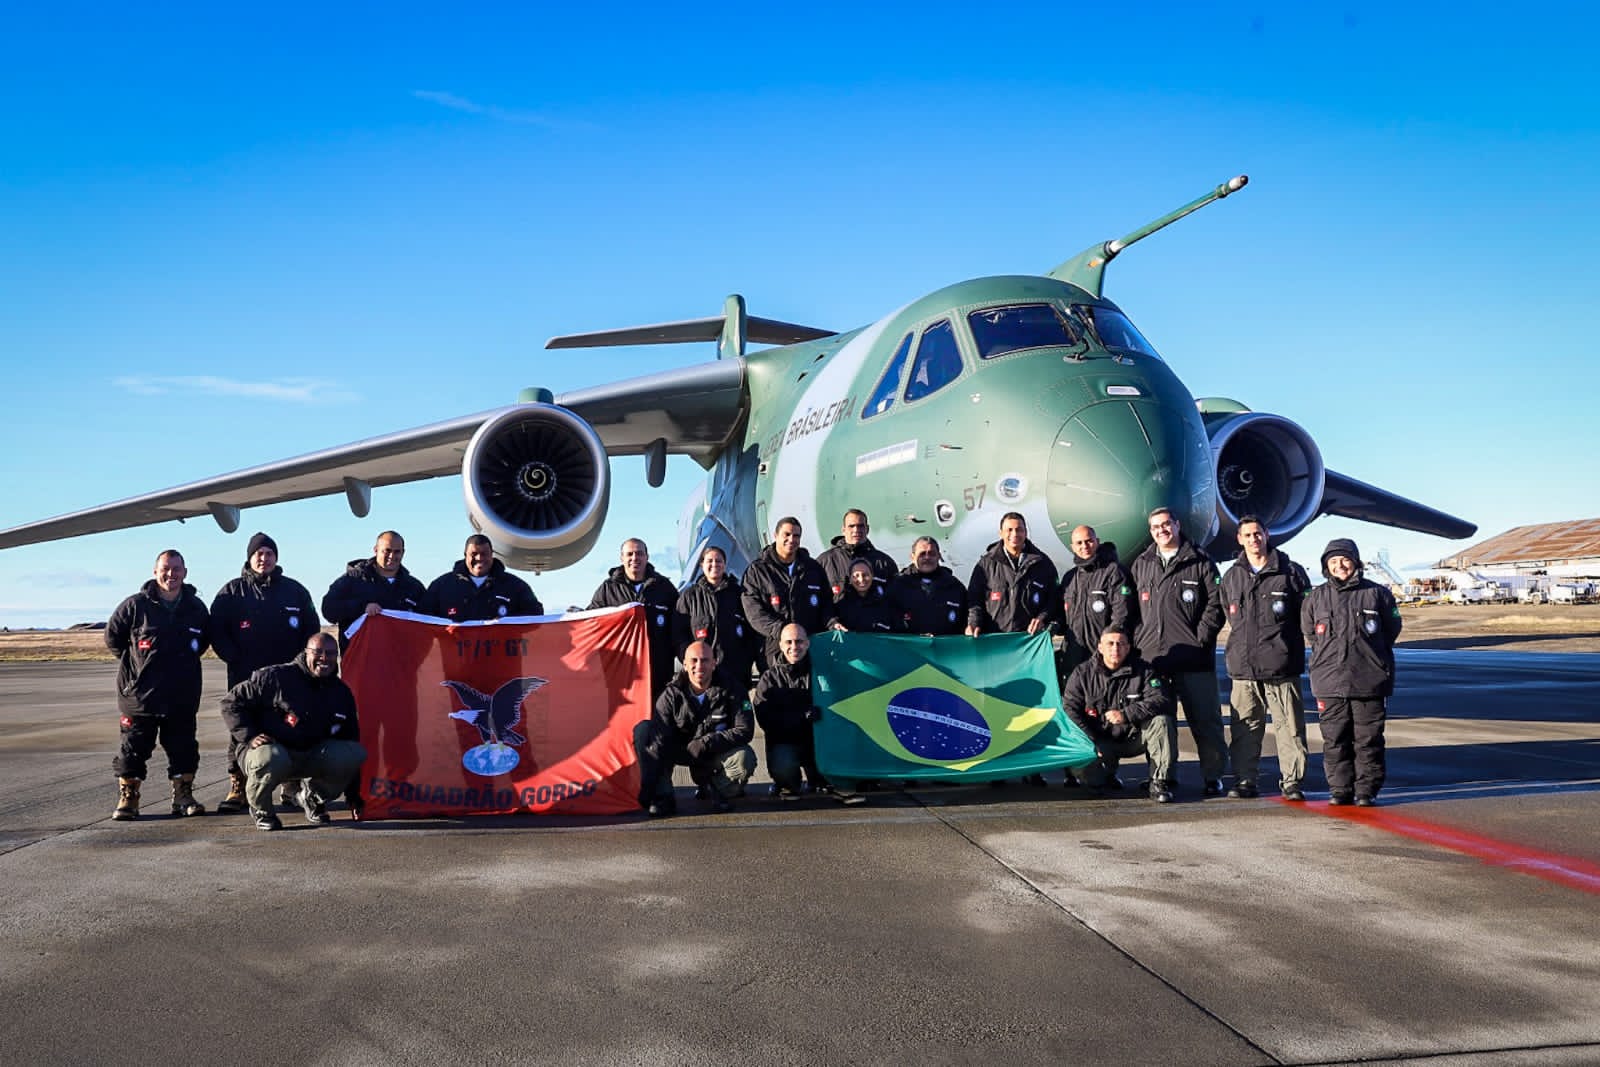 KC-390 Millennium performs, for the first time, a cargo launch in Antarctica